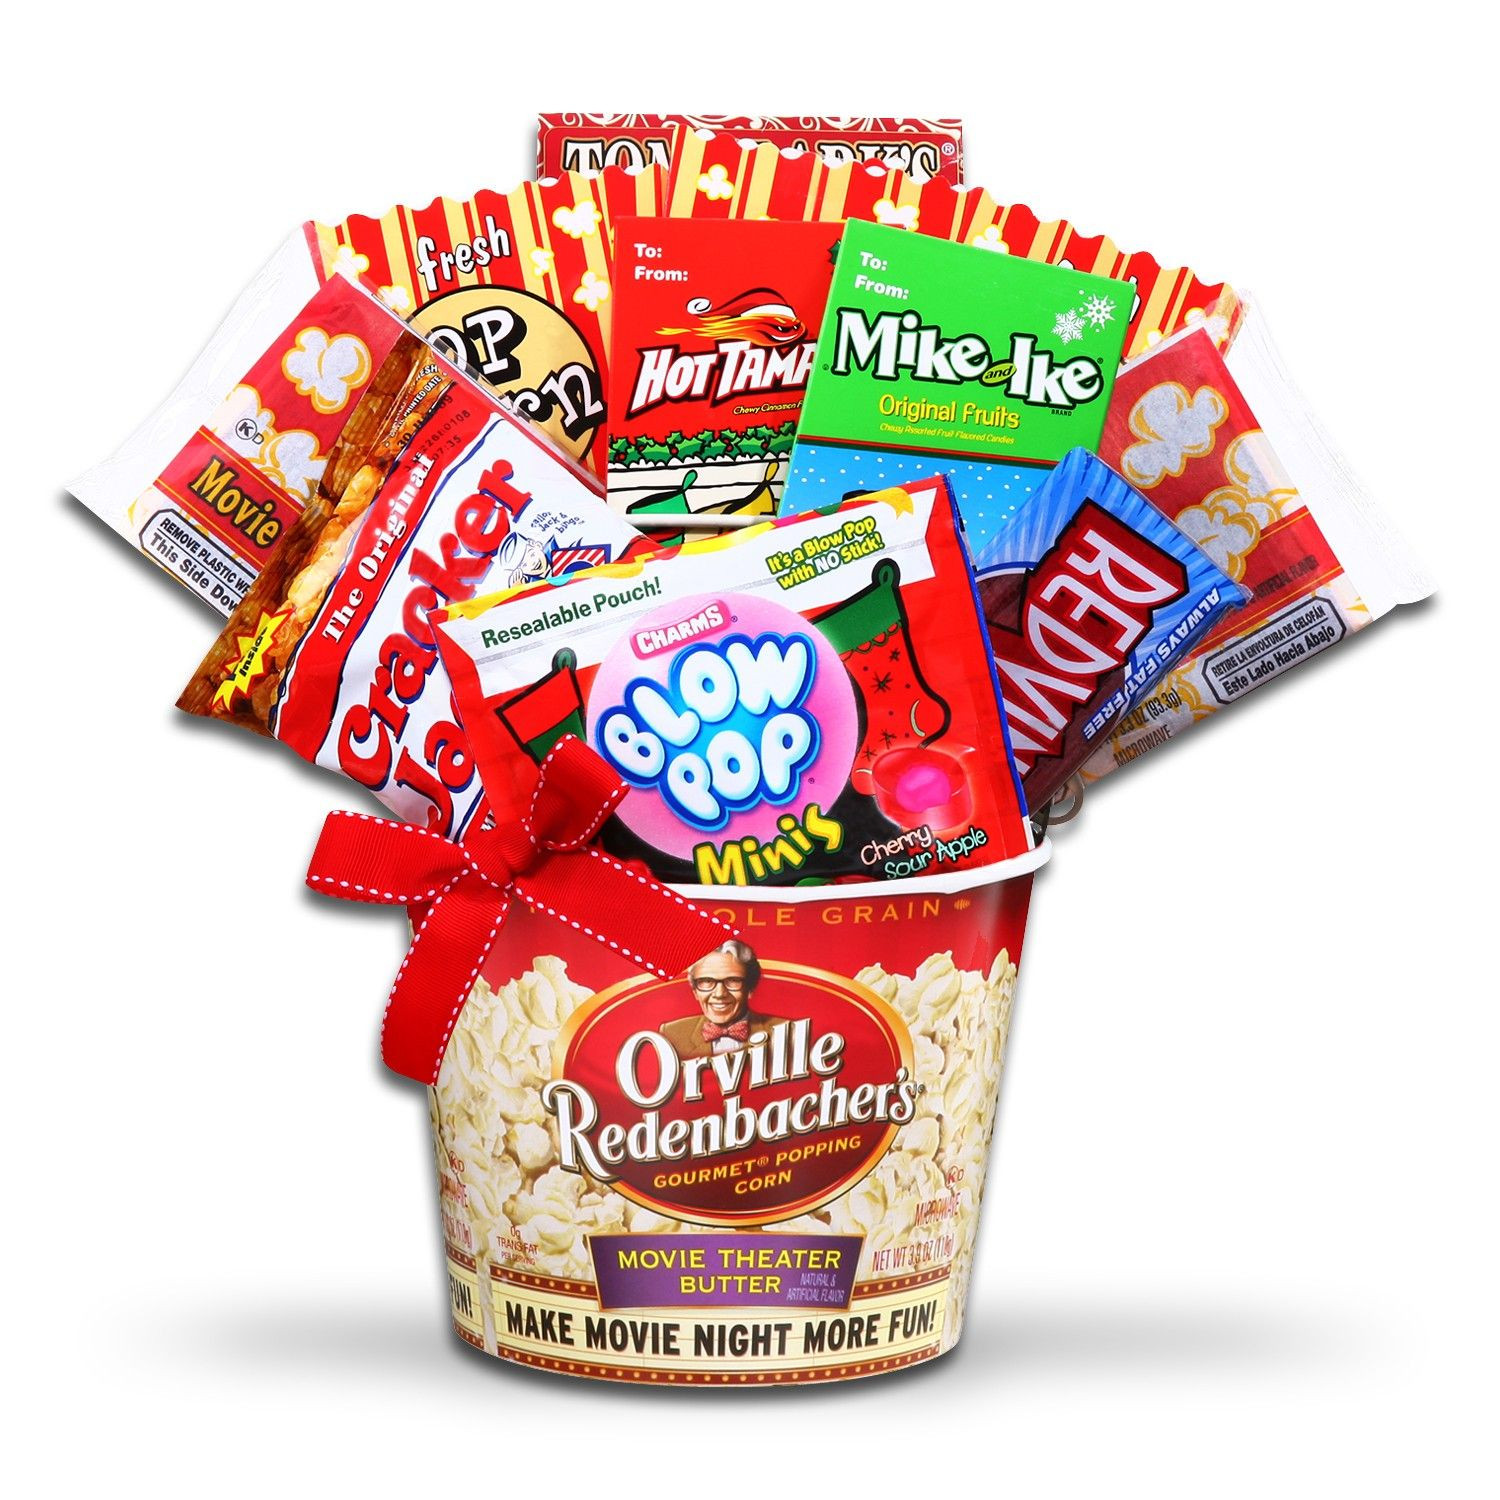 Movie Theater Gift Basket Ideas
 Assemble a Movie Night Gift Basket for under $10 Money